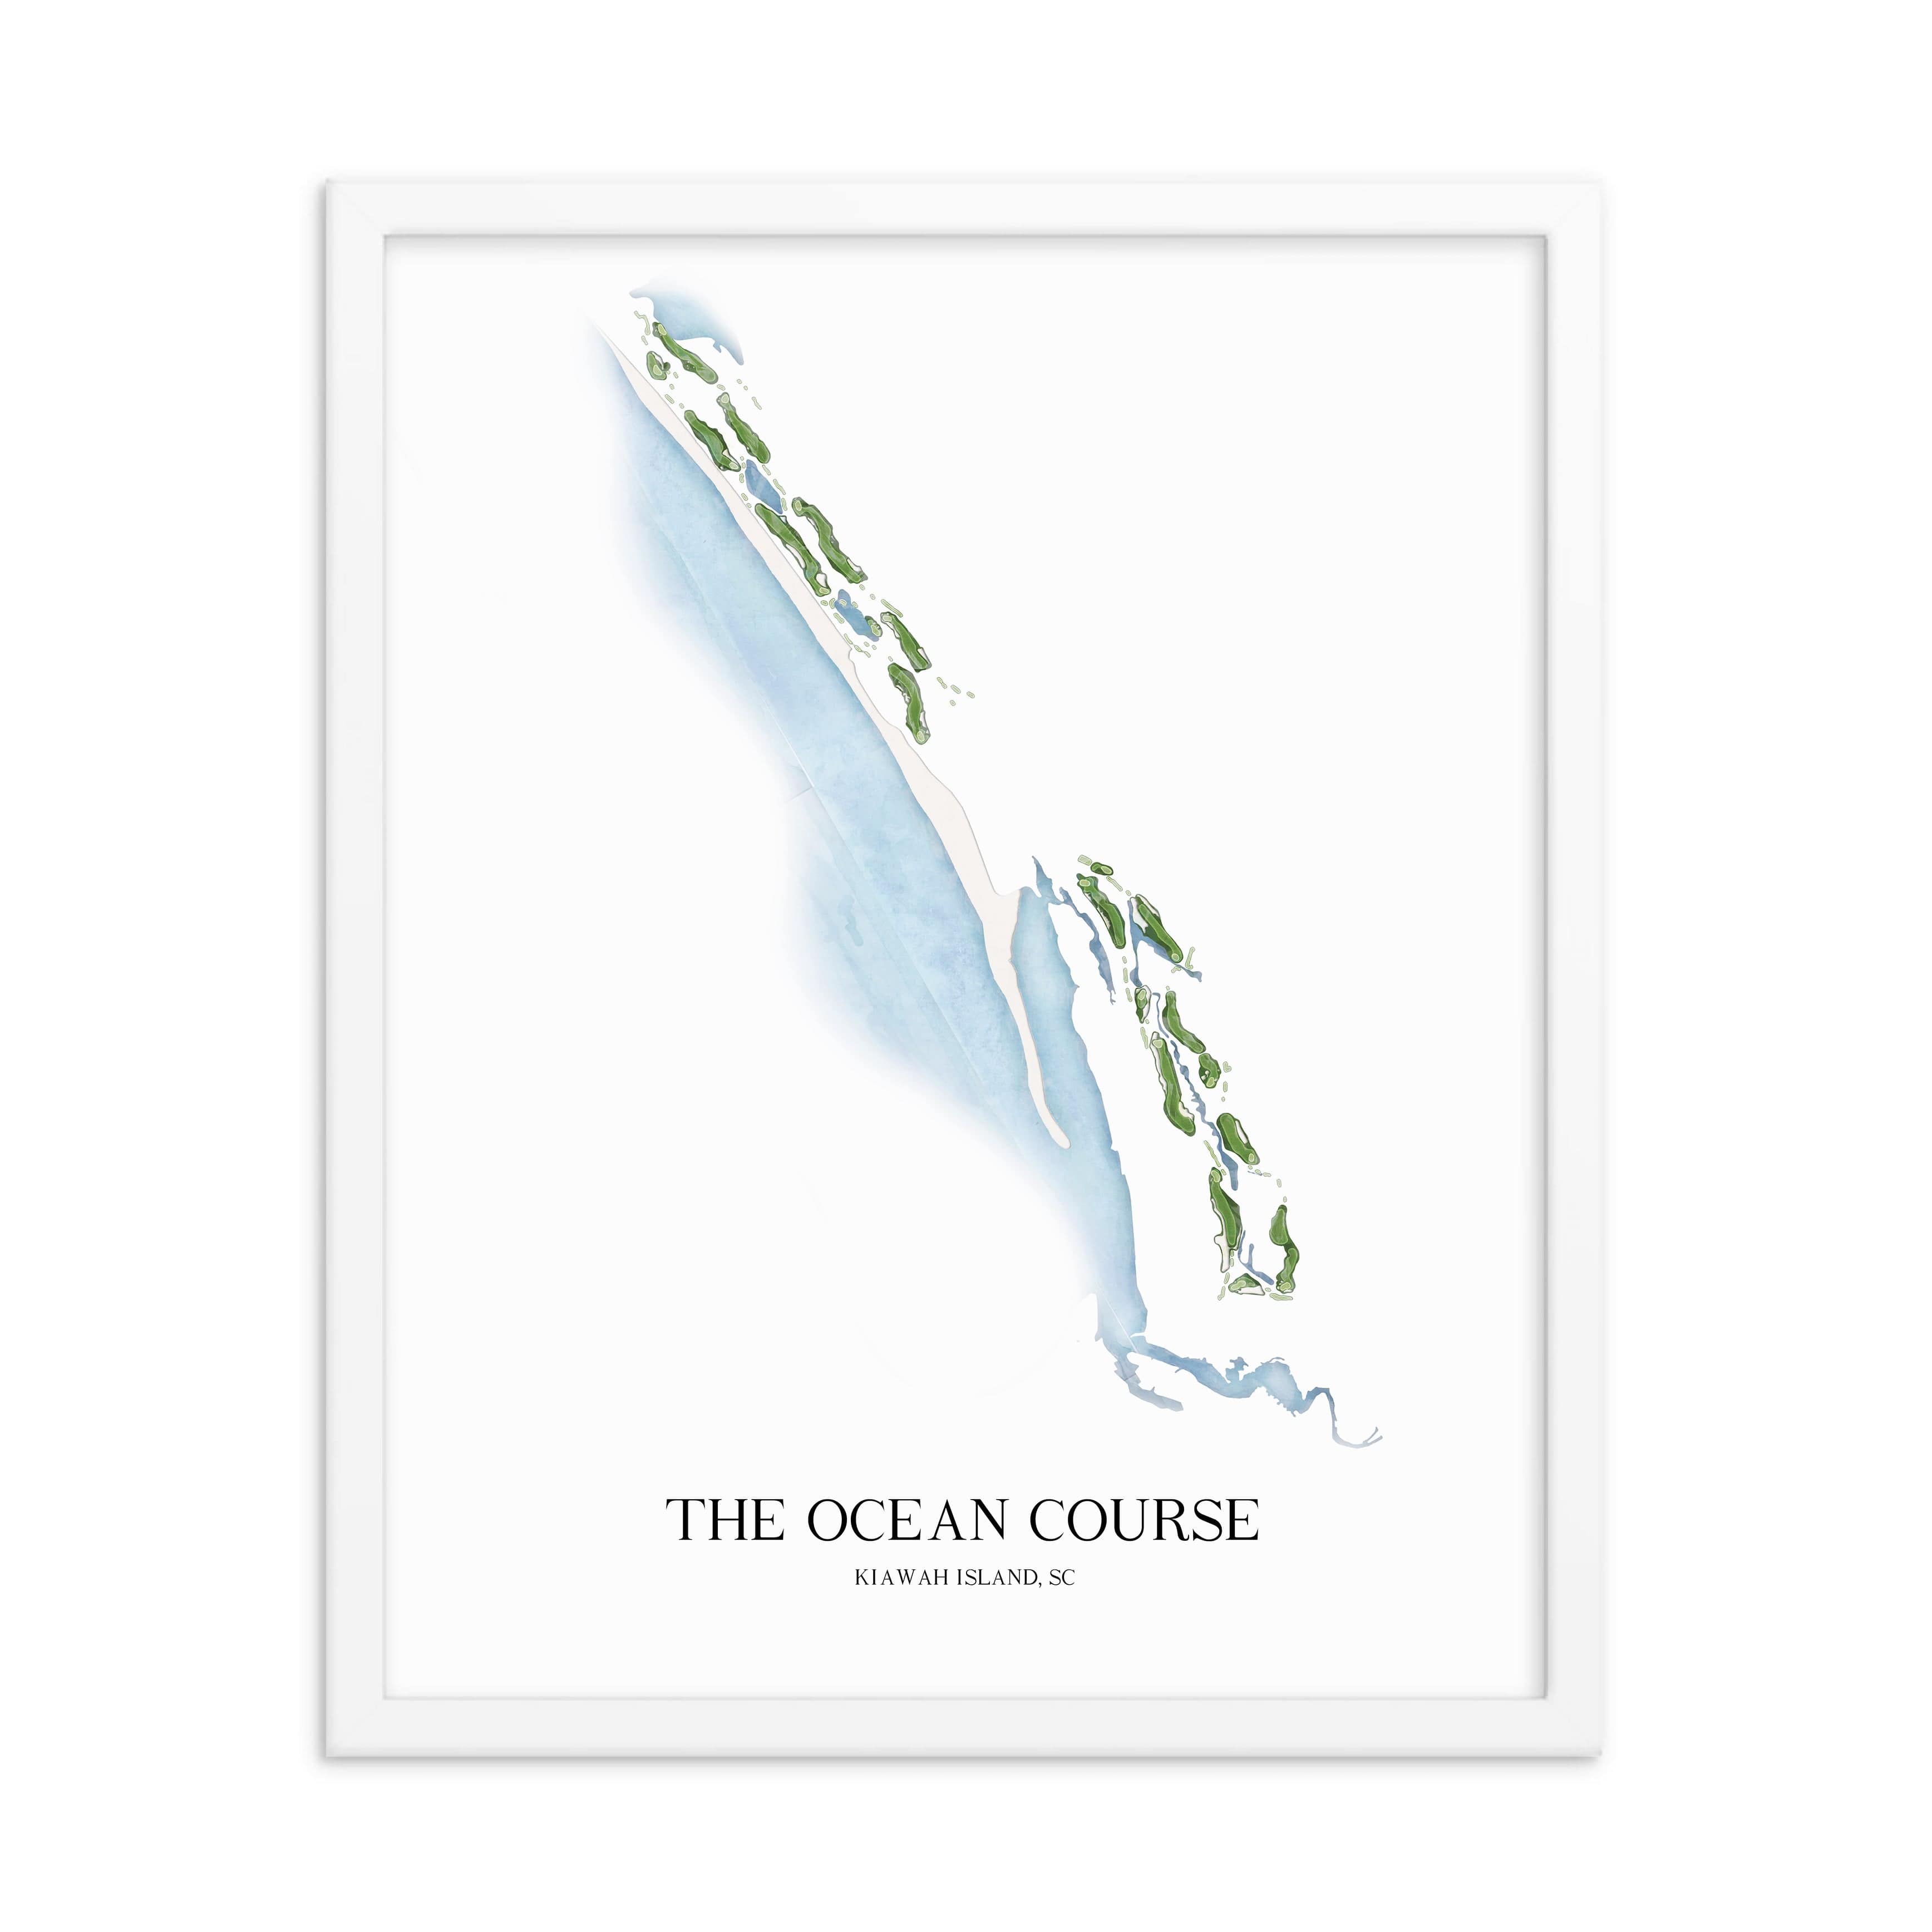 The 19th Hole Golf Shop - Golf Course Prints -  8" x 10" / White The Ocean Course - Kiawah Golf Course Map